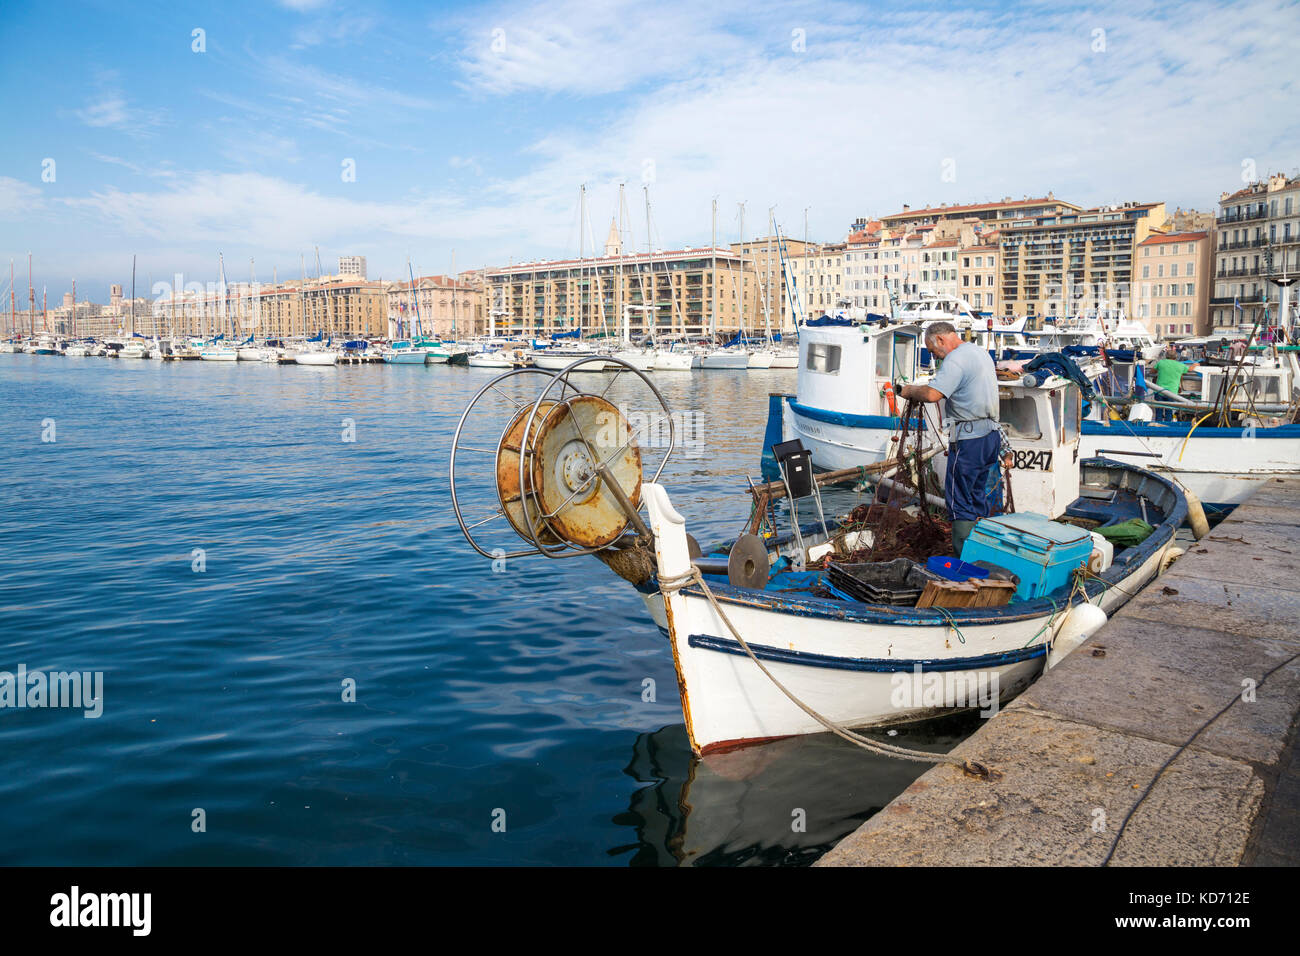 Fisherman pulling fish out of the net in Vieux Port (Old Port) on market day, Marseille, France Stock Photo